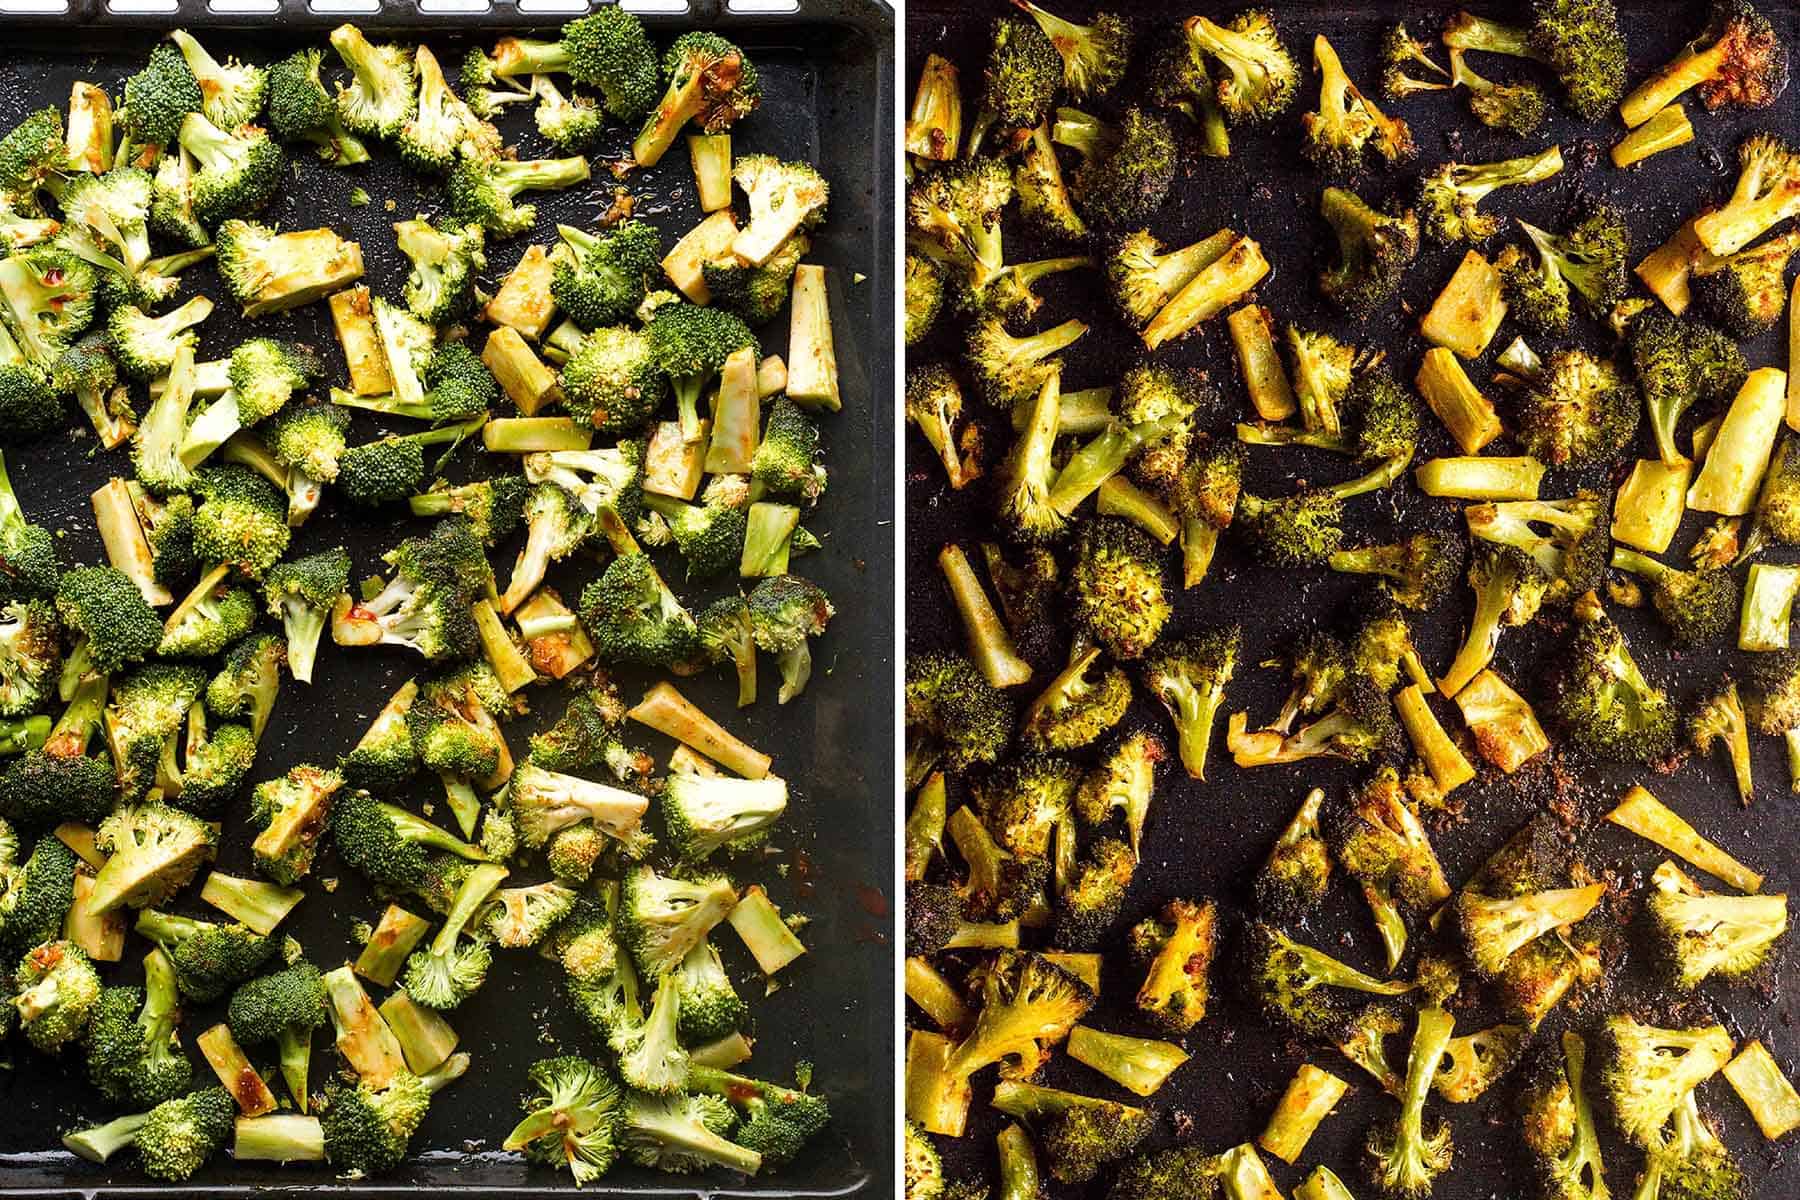 Diptych of the broccoli before and after baking.